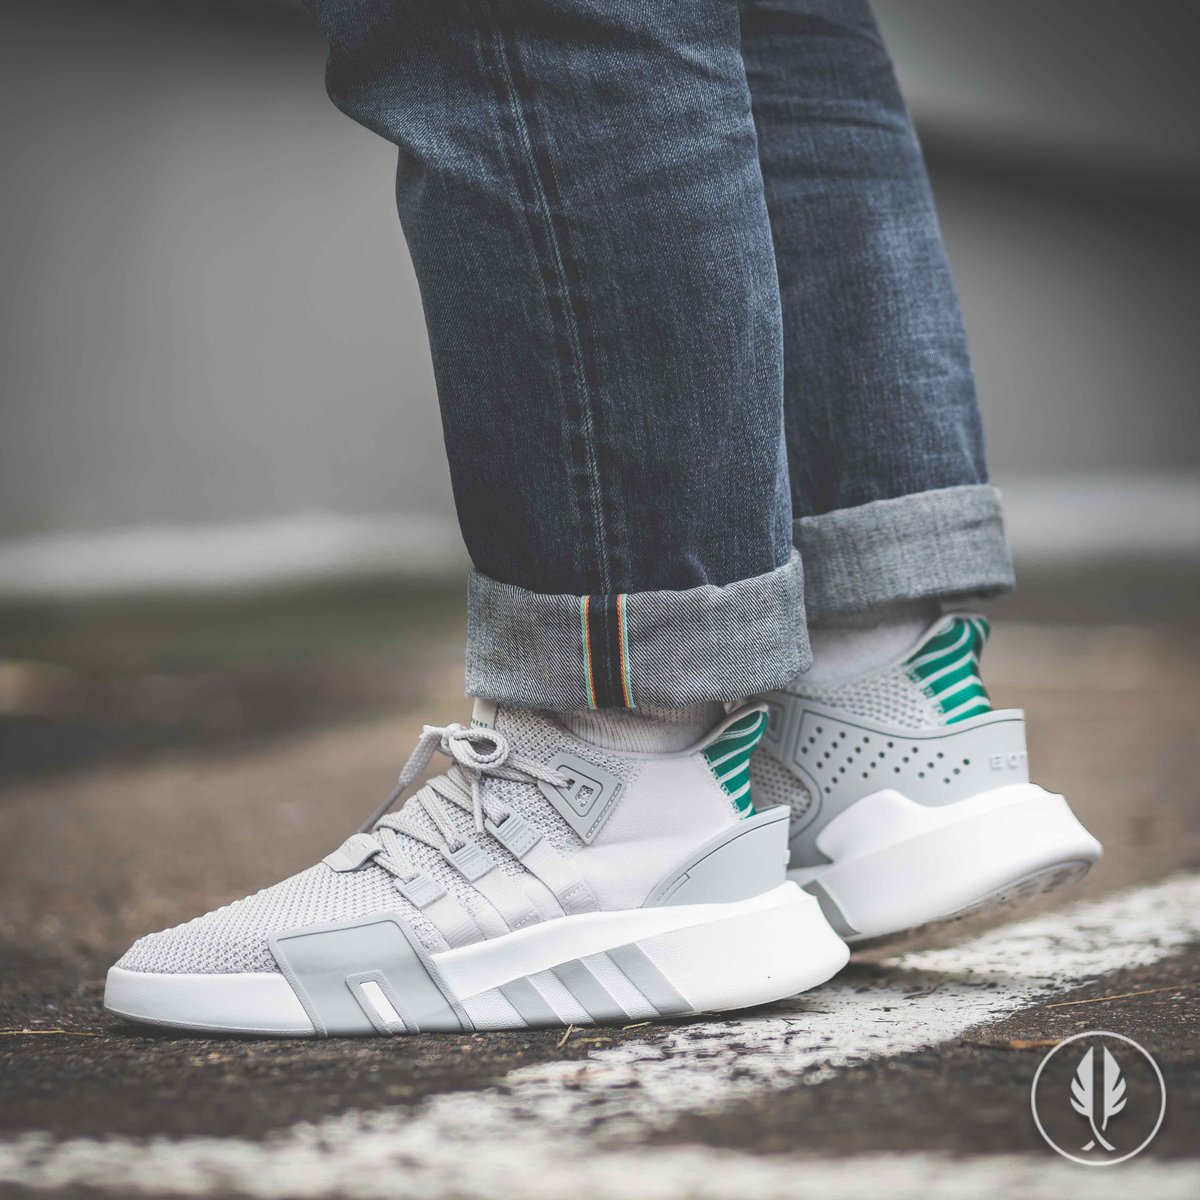 adidas eqt bask adv outfit